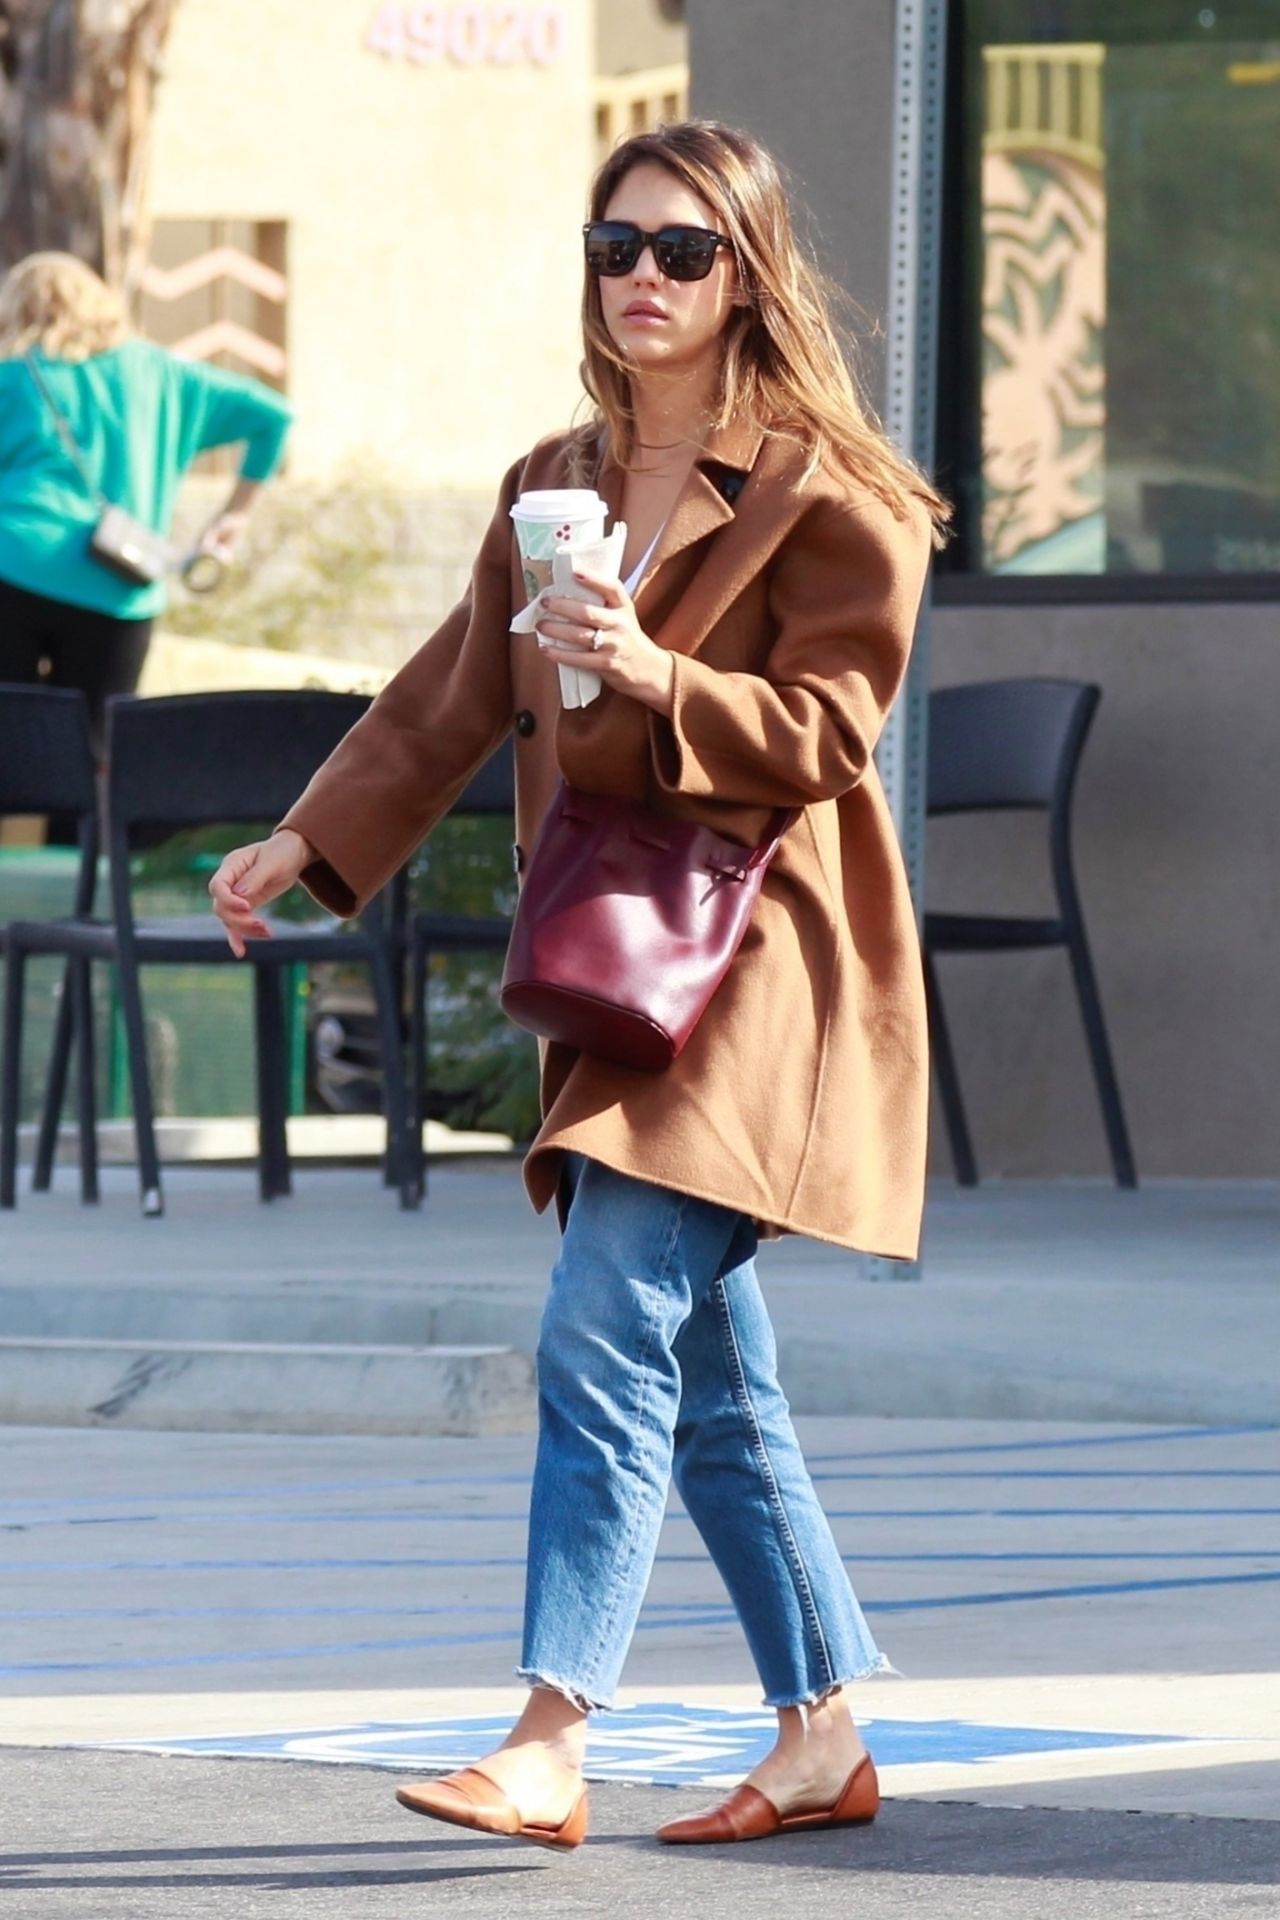 jessica-alba-out-in-palm-springs-11-18-2018-3.jpg